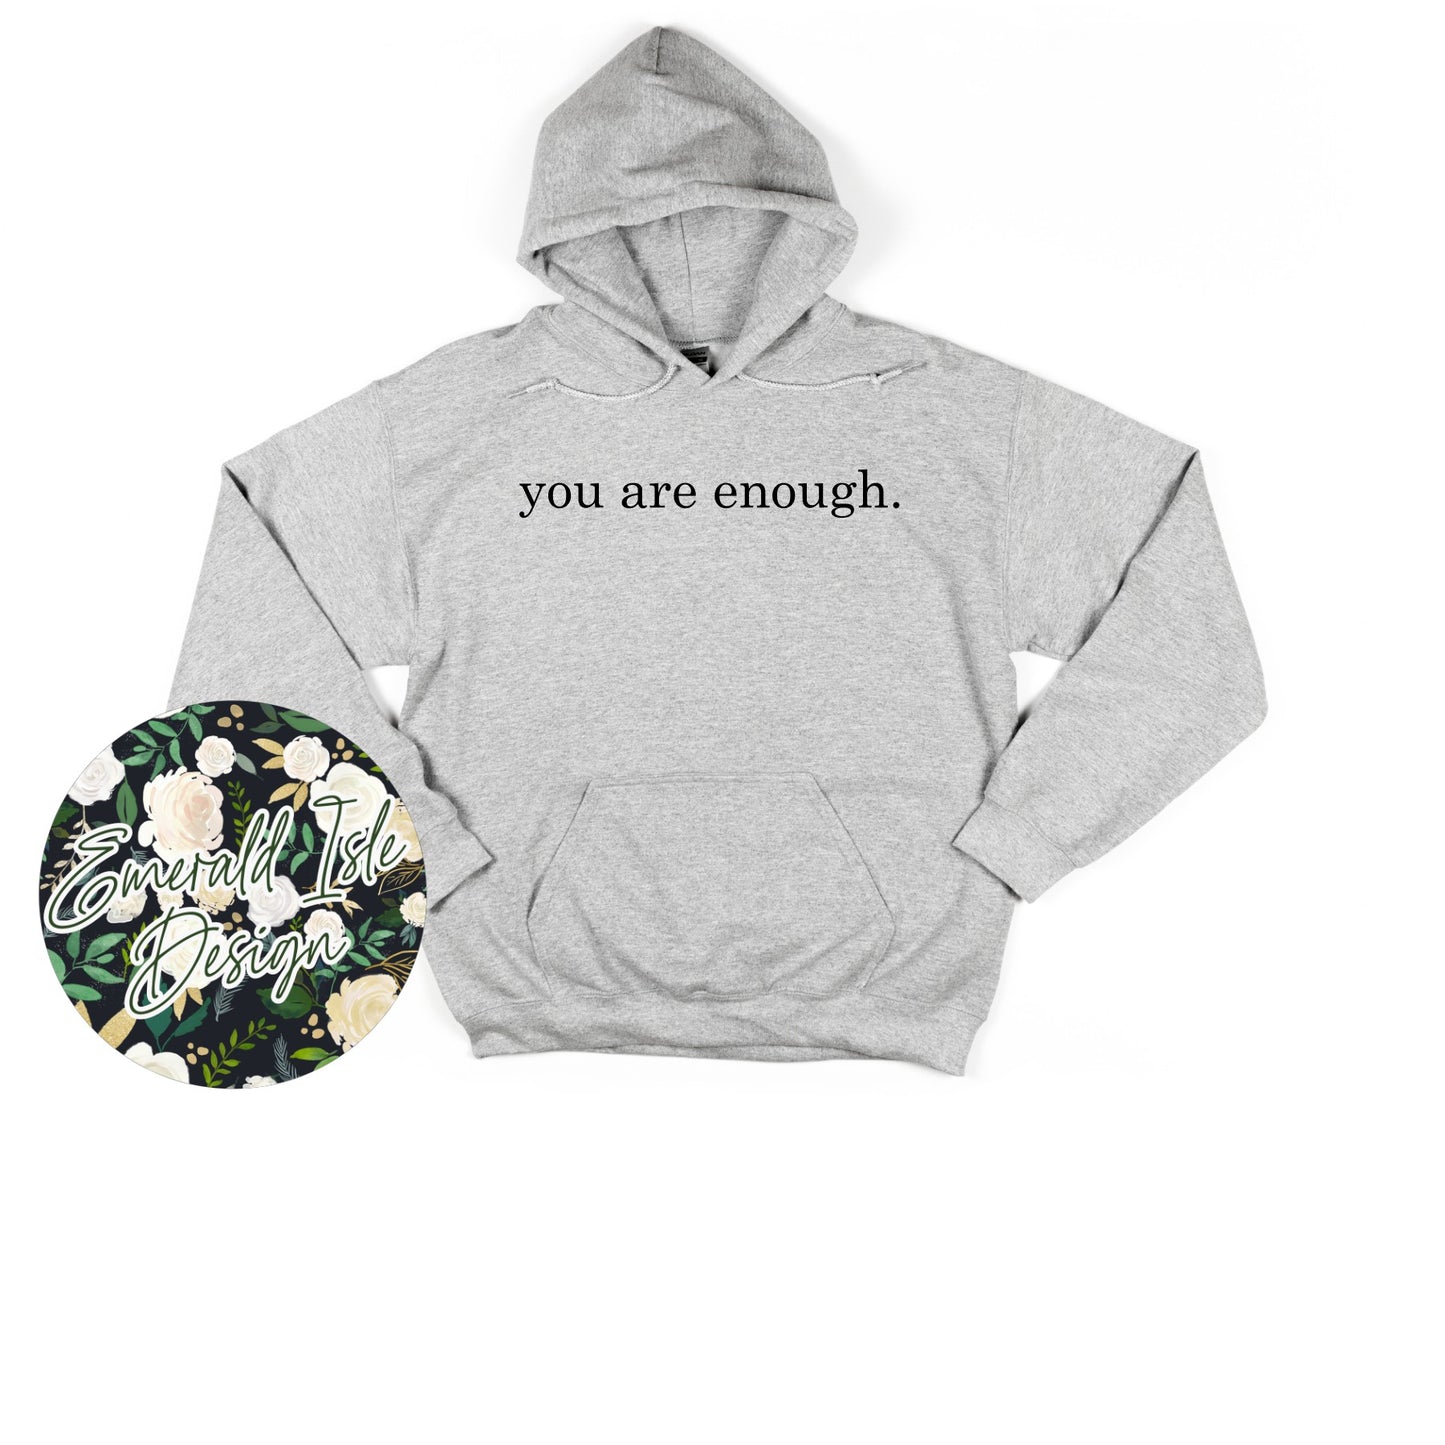 **SALE** You Are Enough Design, Choose Your Own Style and Color!